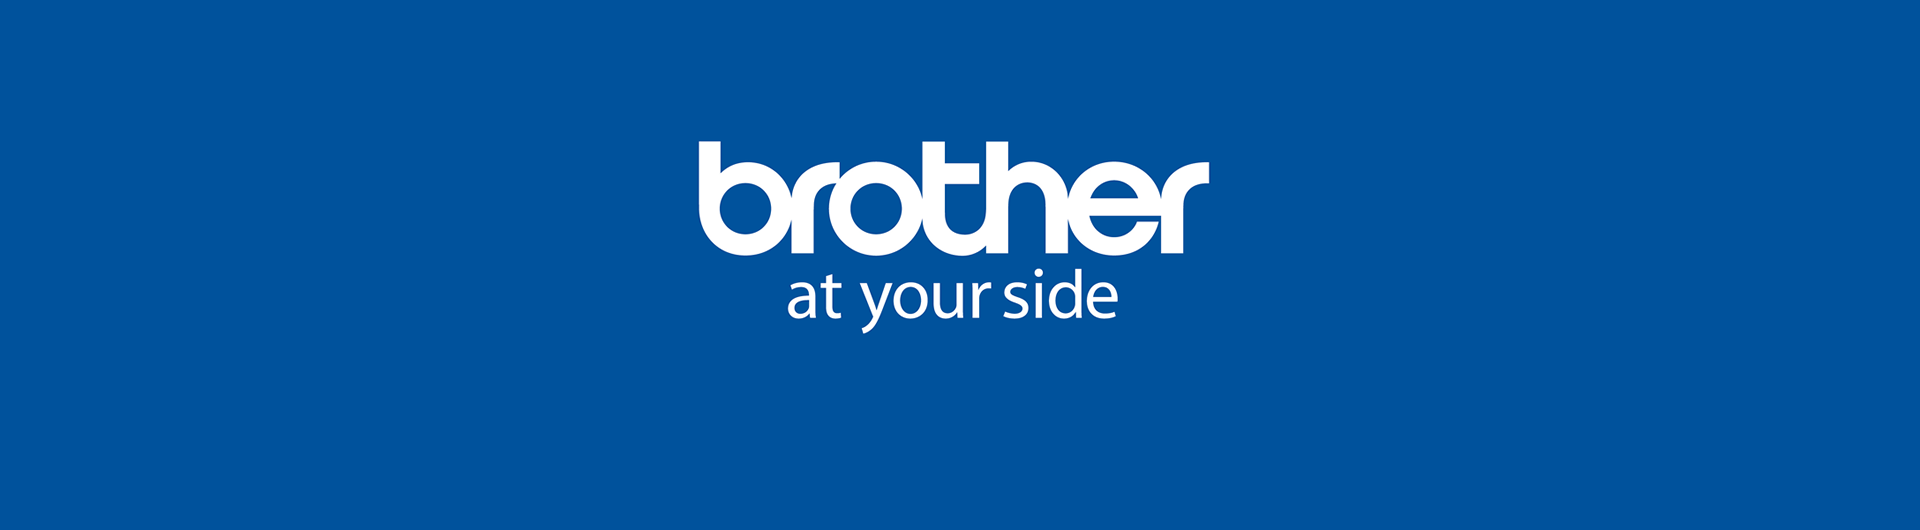 Brother, 100 años ‘at your side’